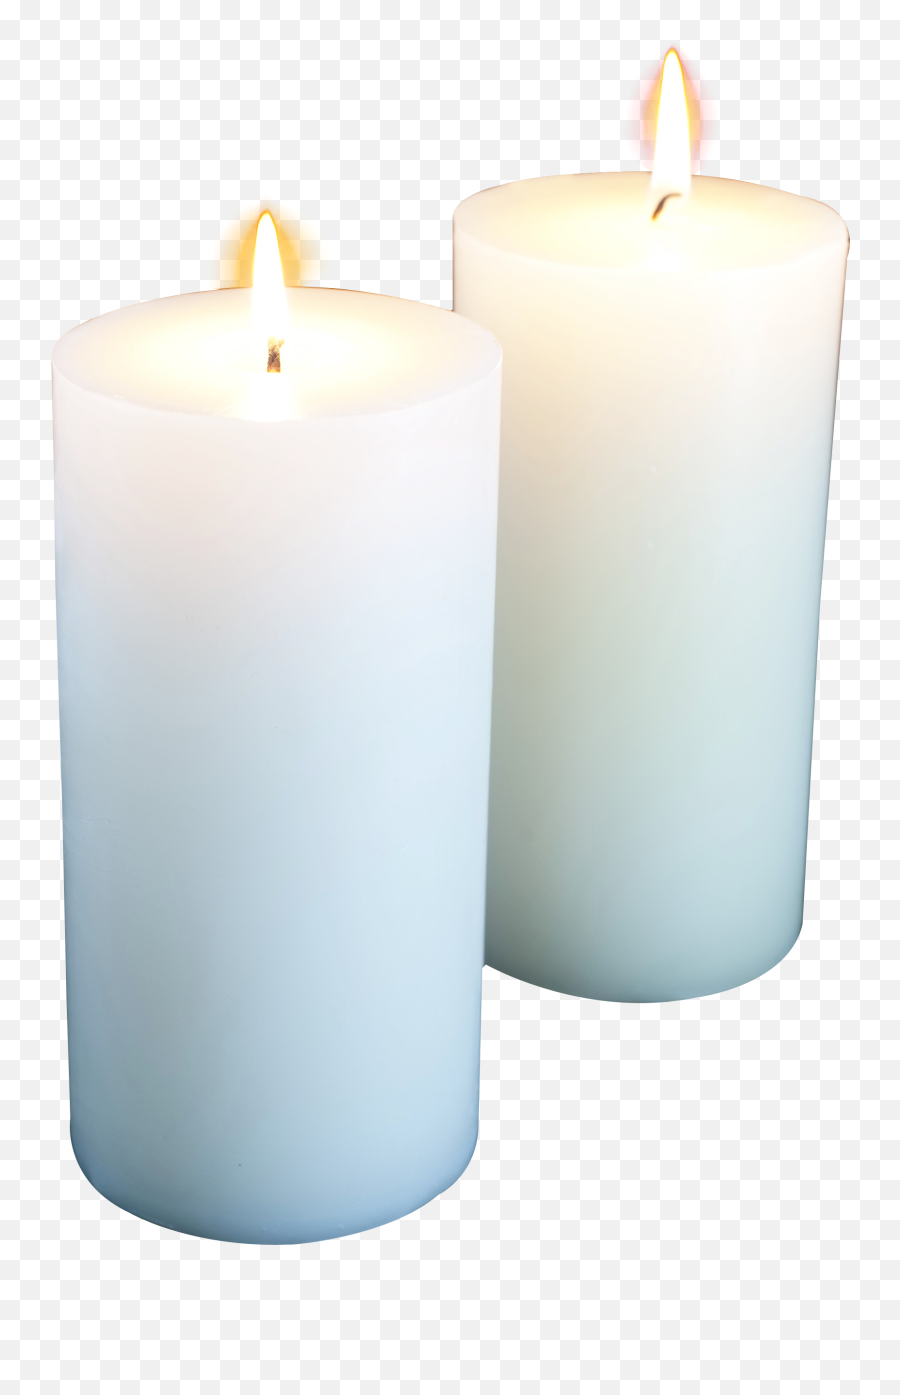 Download Candle Png Image For Free - Transparent Background Candles Png,Candle Transparent Png